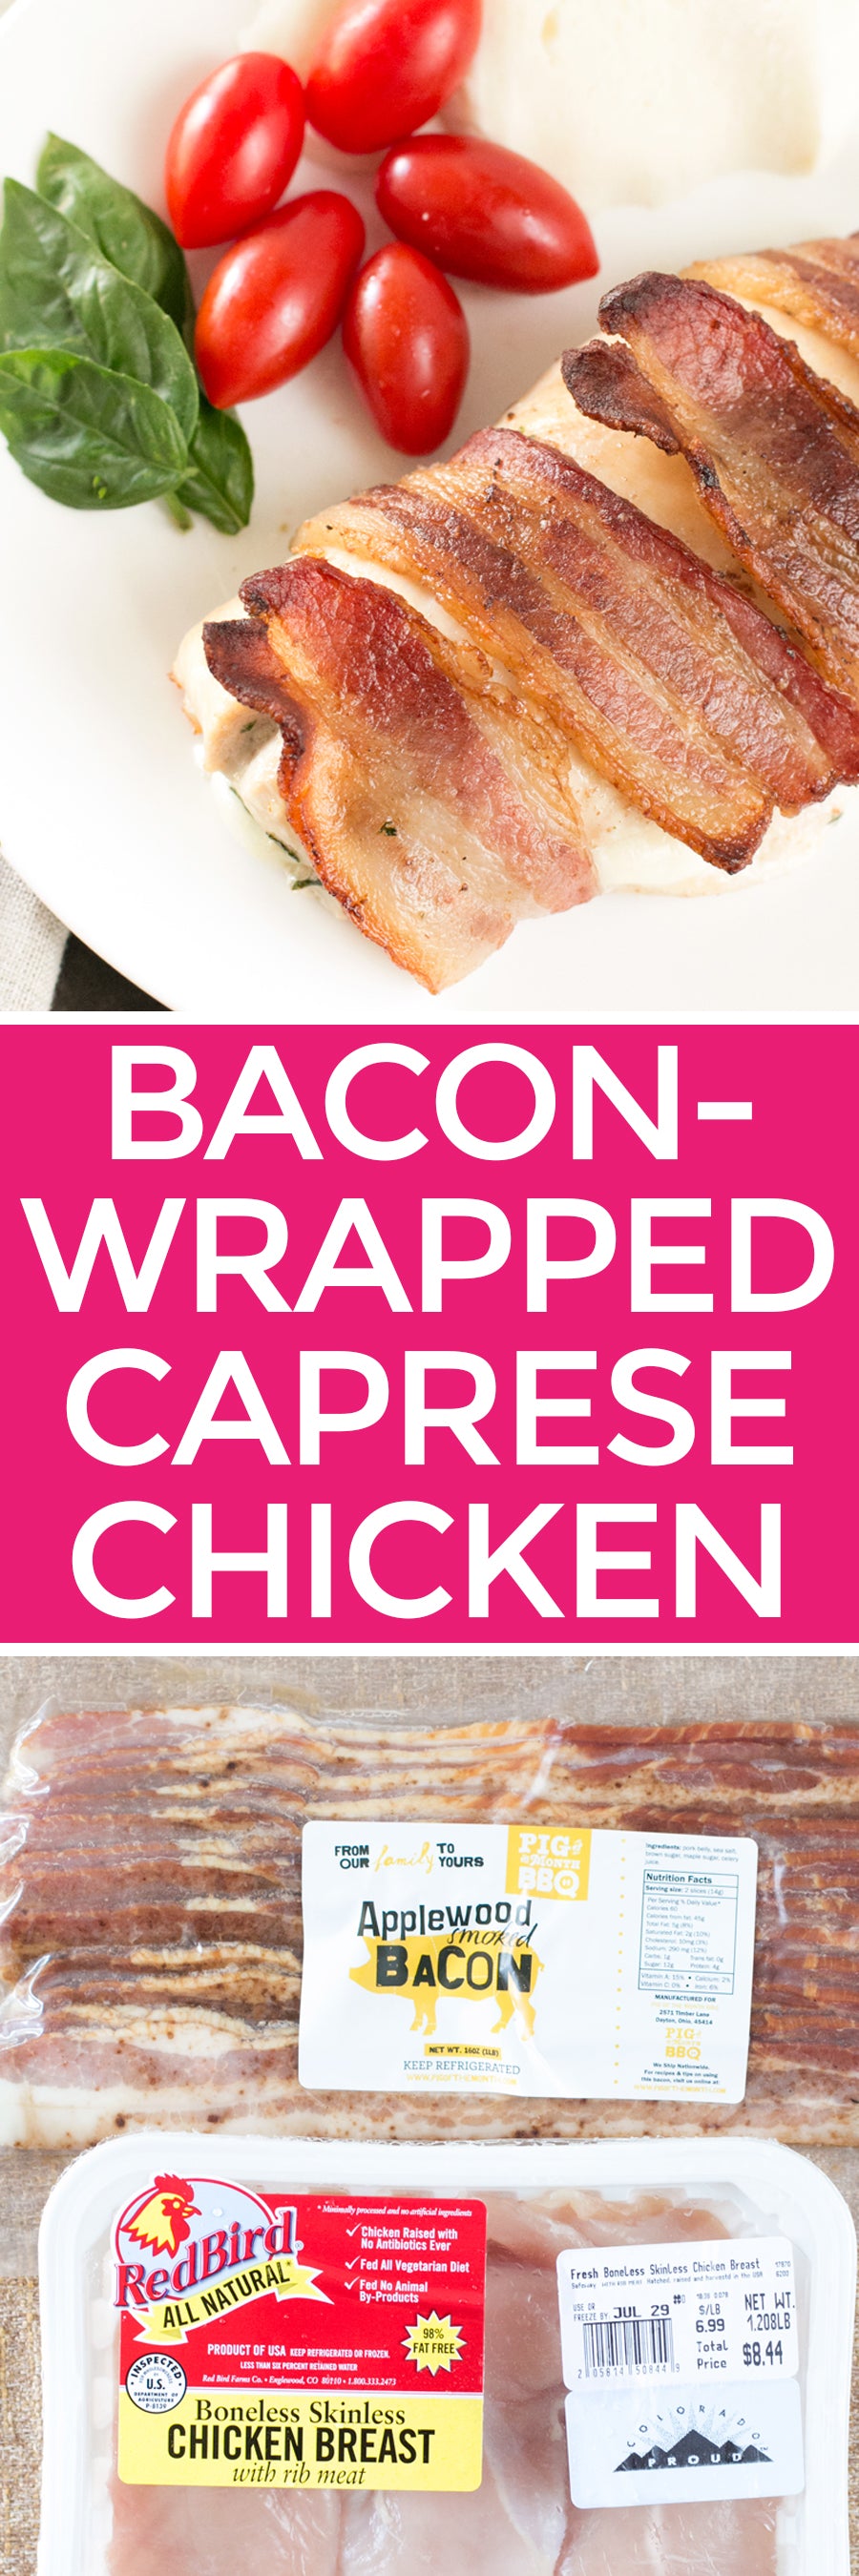 Bacon-Wrapped Caprese Chicken | pigofthemonth.com #bacon #dinner #healthy